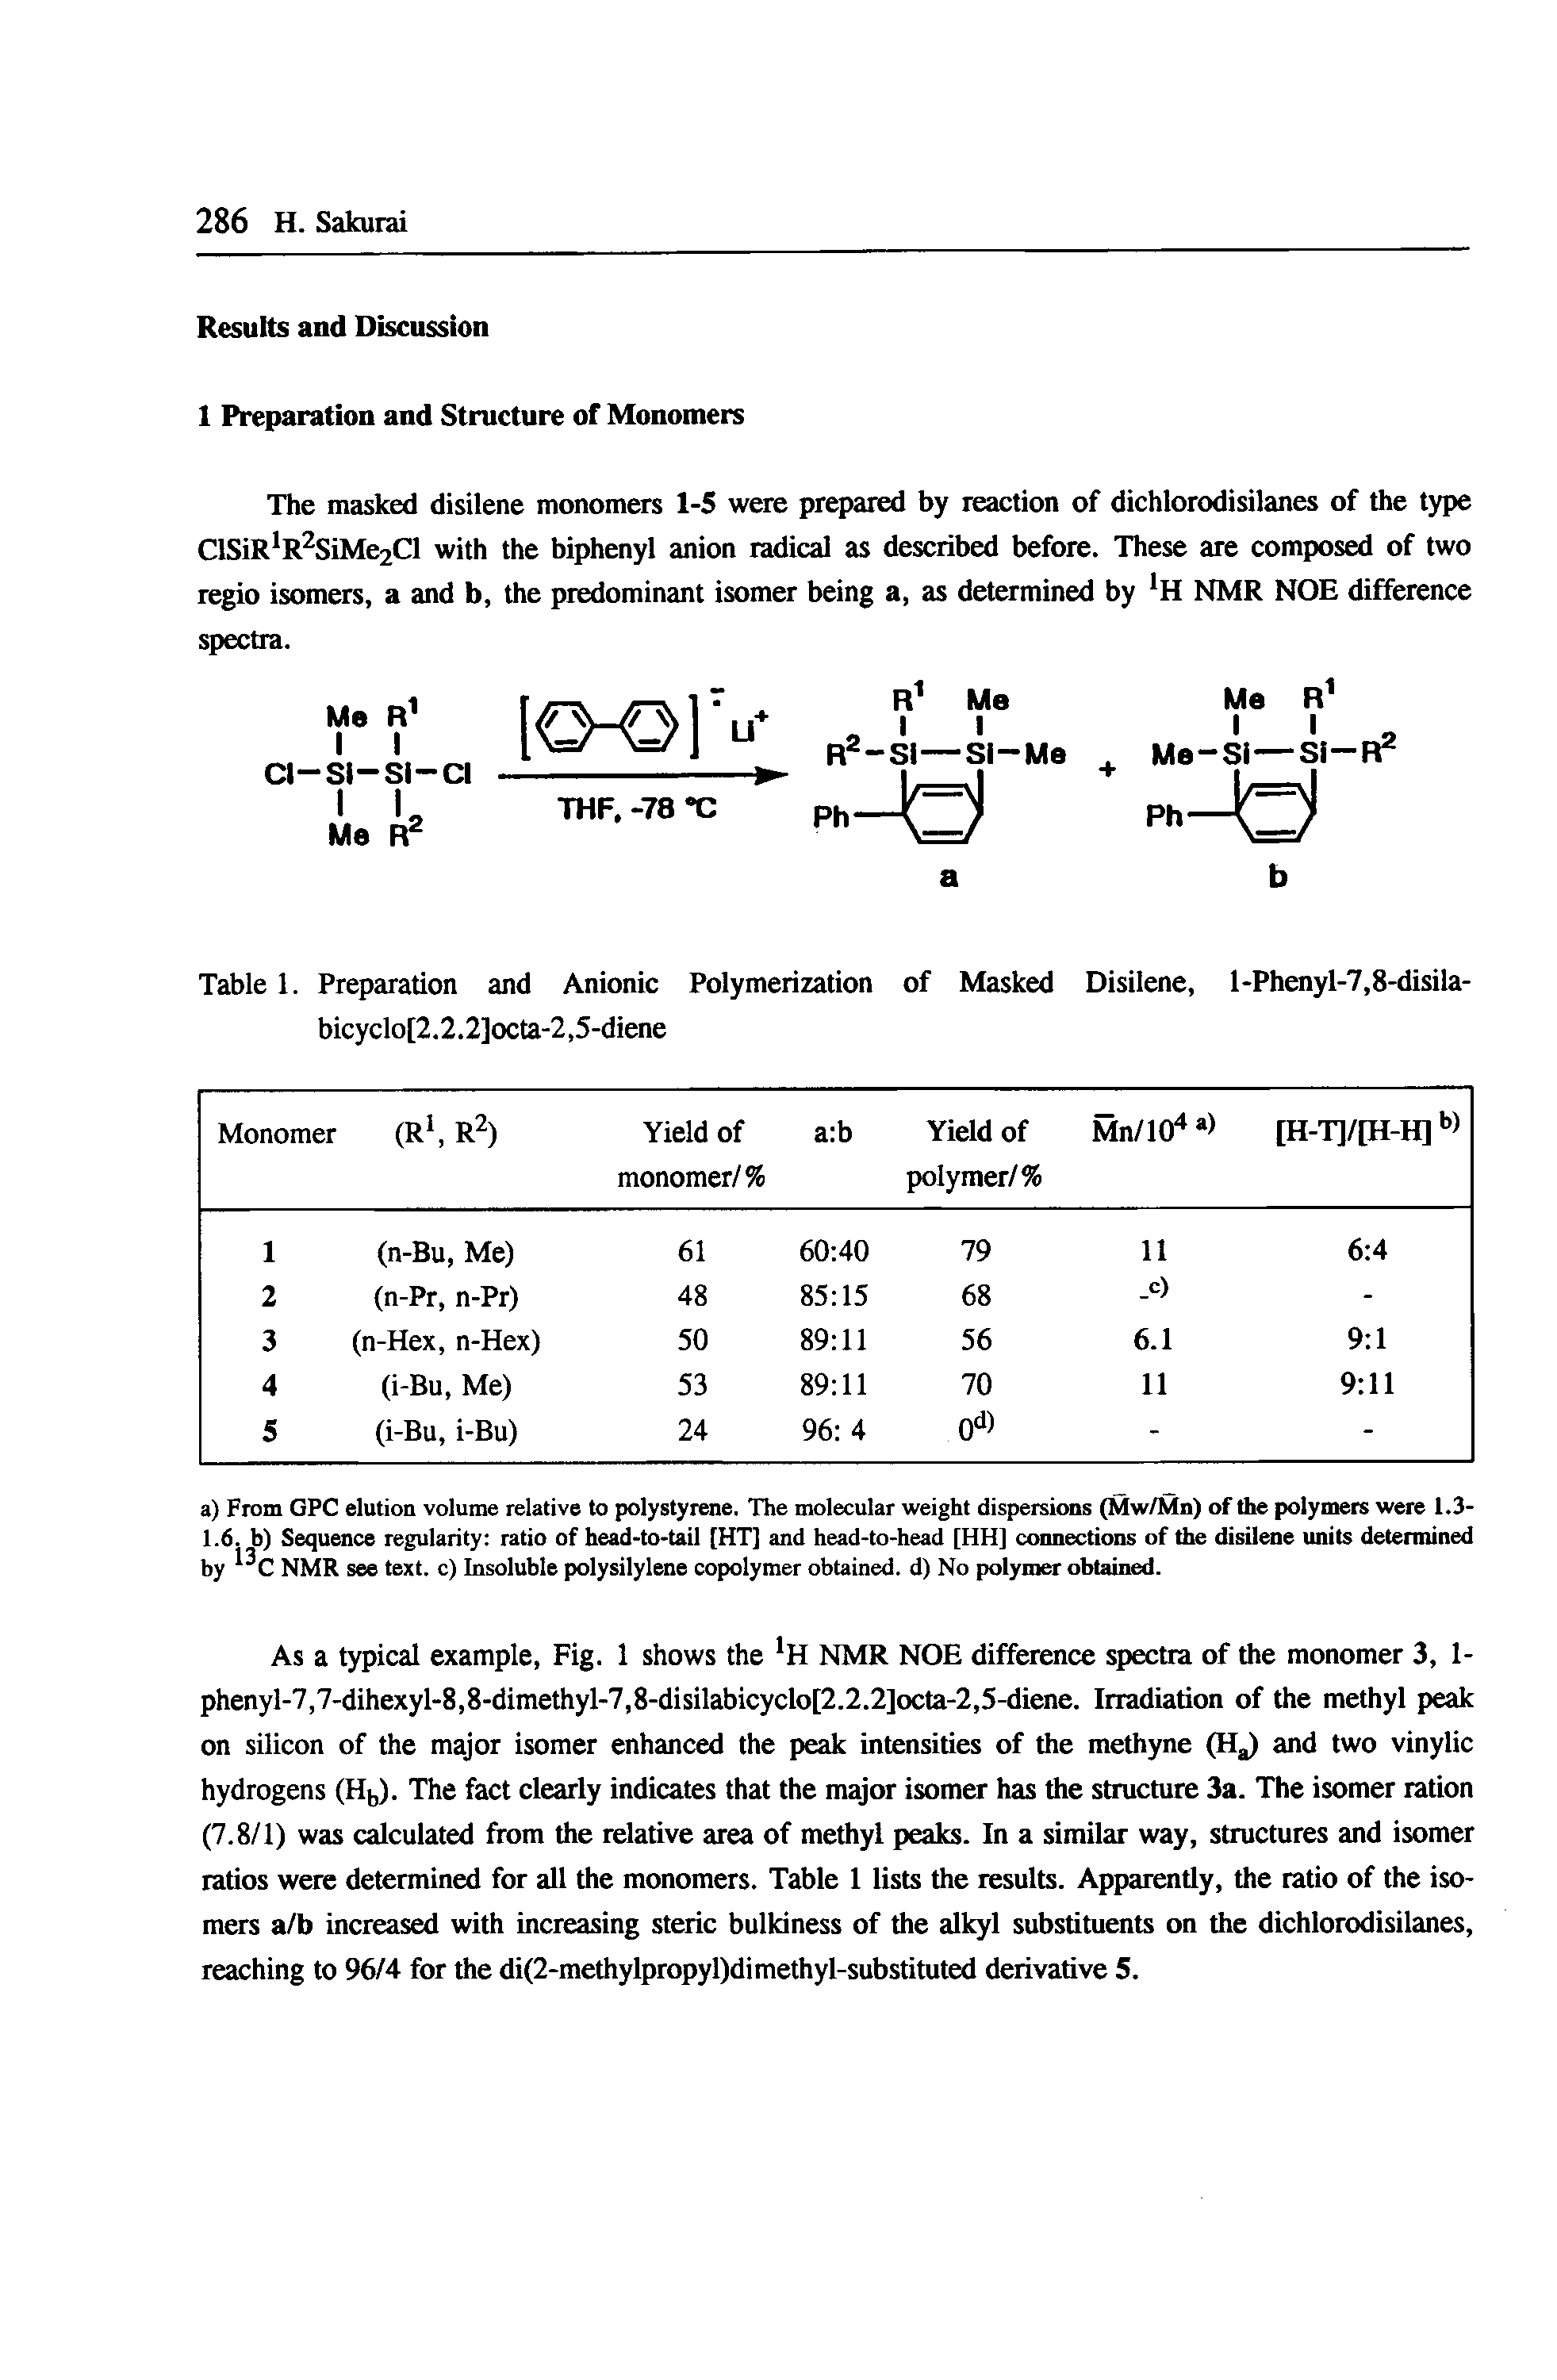 Table 1. Preparation and Anionic Polymerization of Masked Disilene, 1-Phenyl-7,8-disila-bicyclo[2.2.2]octa-2,5-diene...